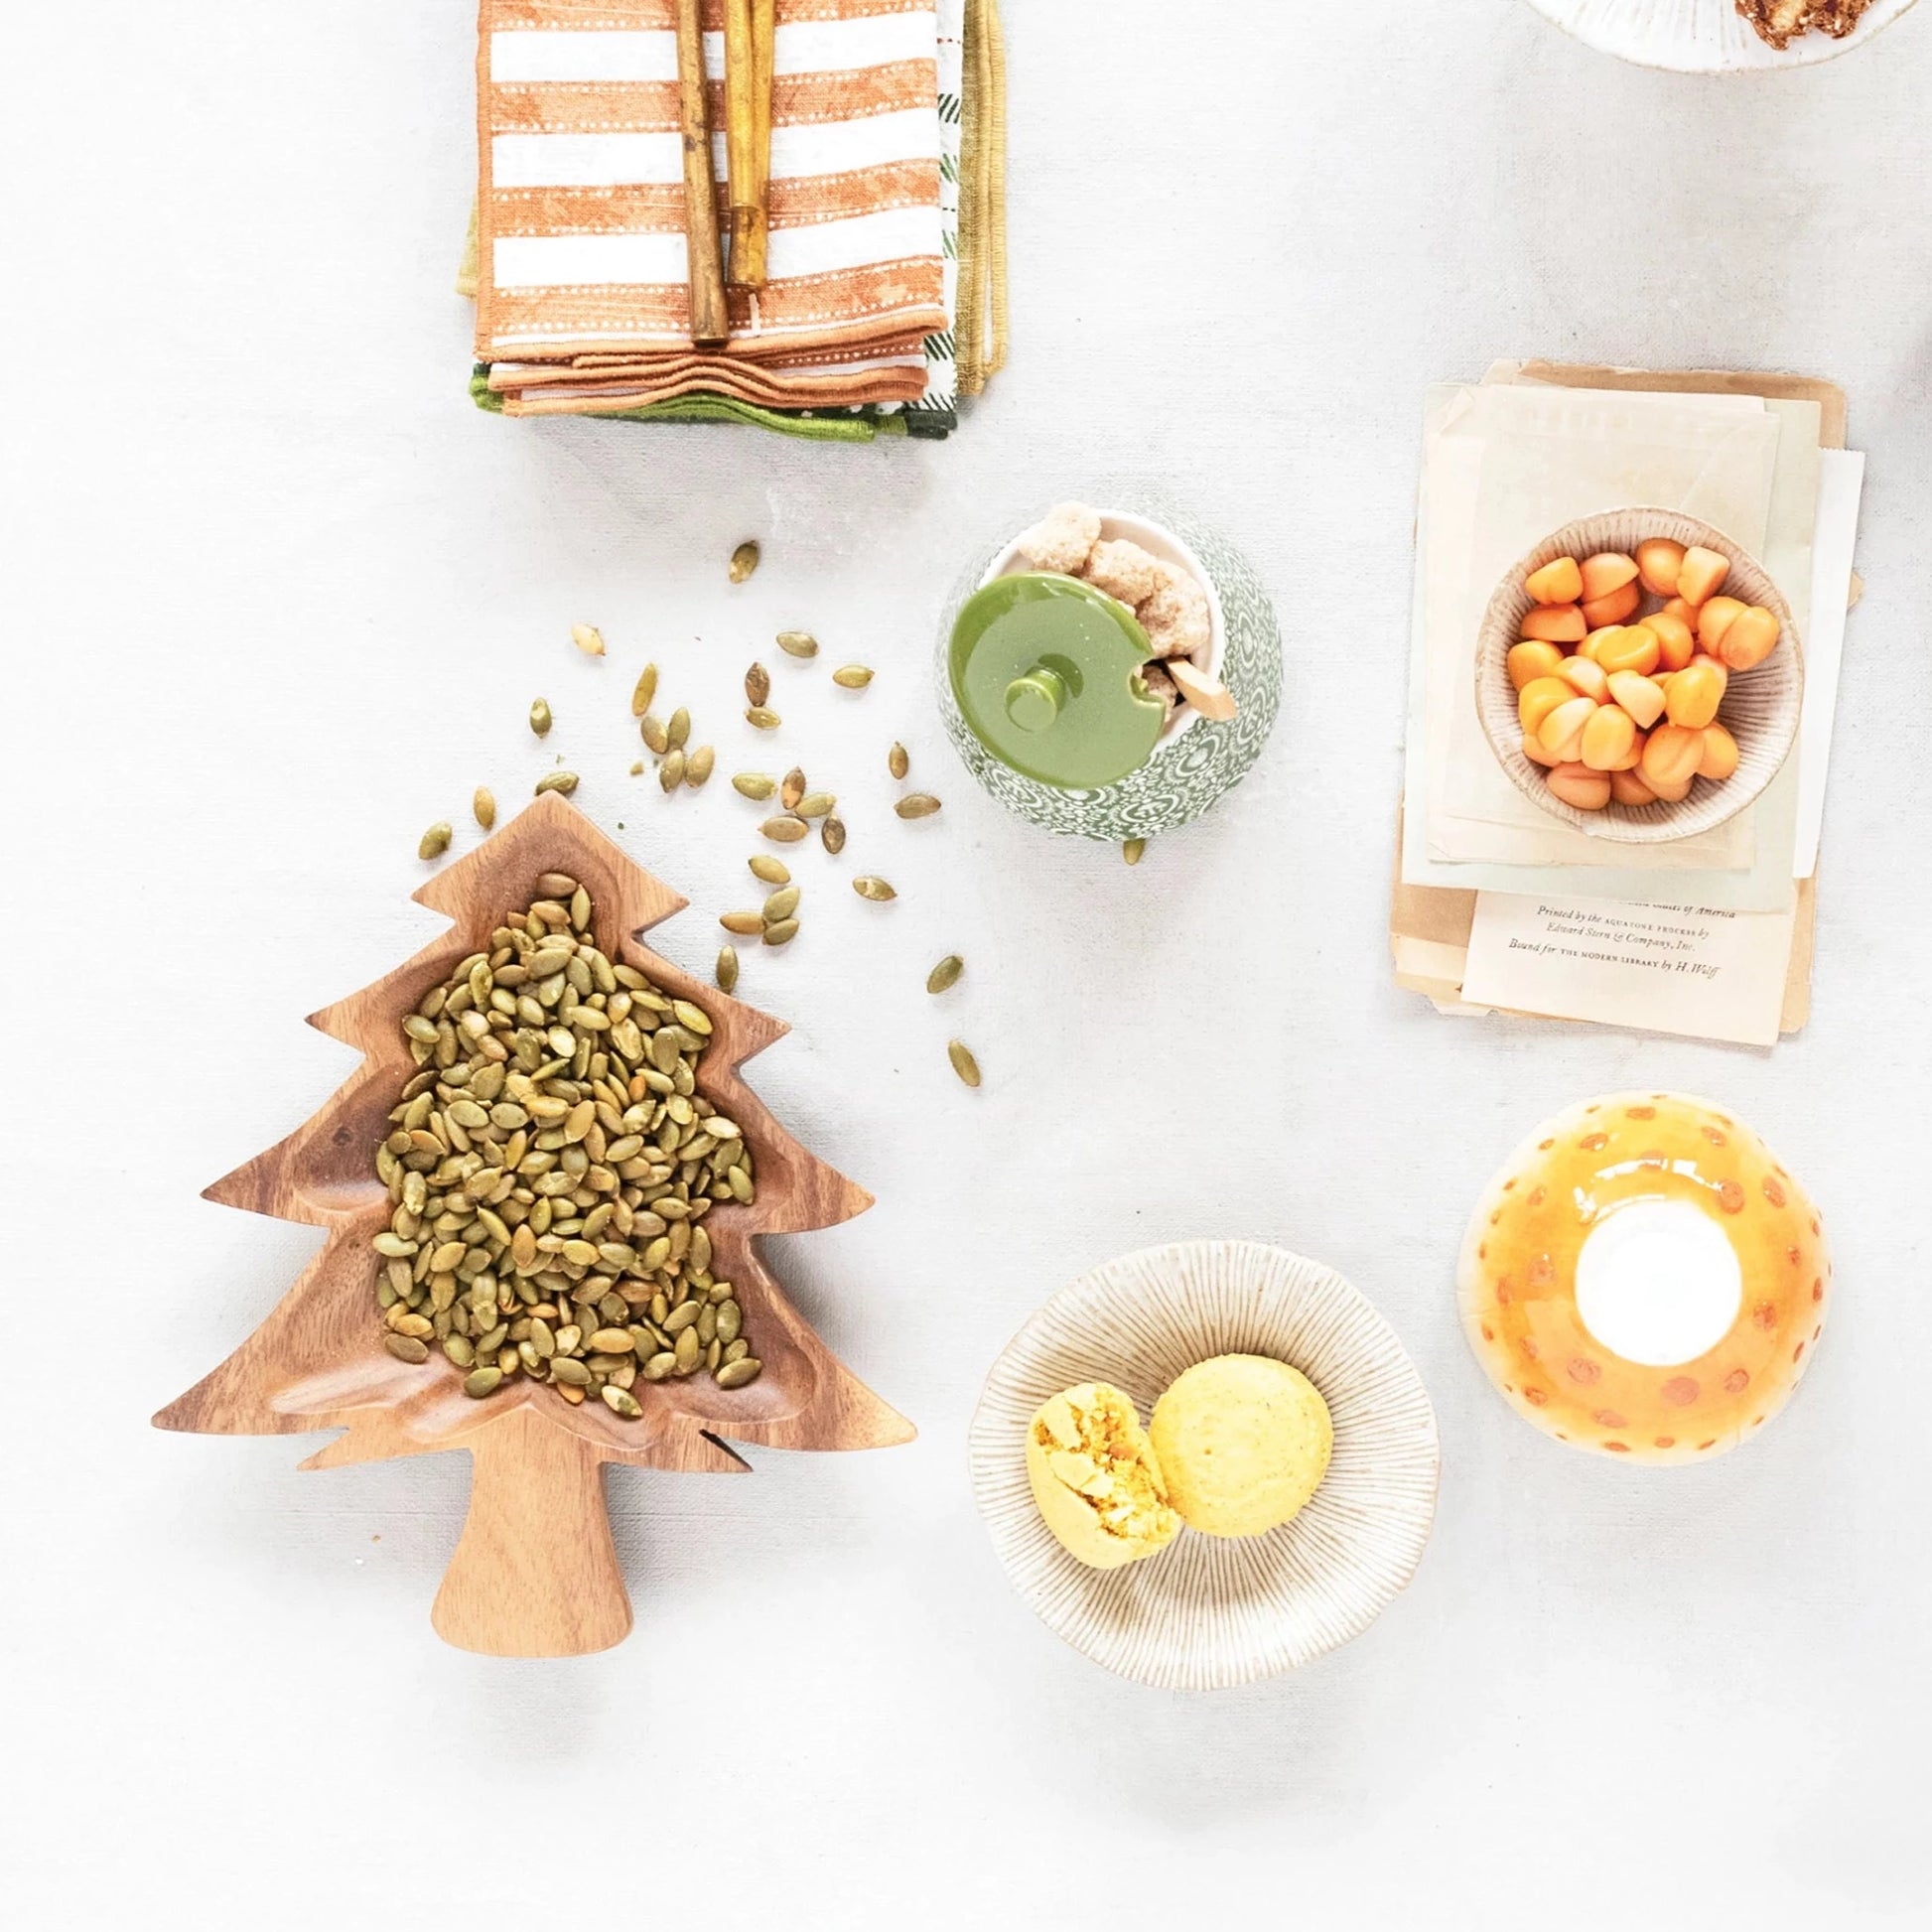 top view of the acacia wood christmas tree shaped bowl filled with pine nuts and displayed next to striped towels, gold flatware, bowls of dip, mug, and plate of bread on a white surface